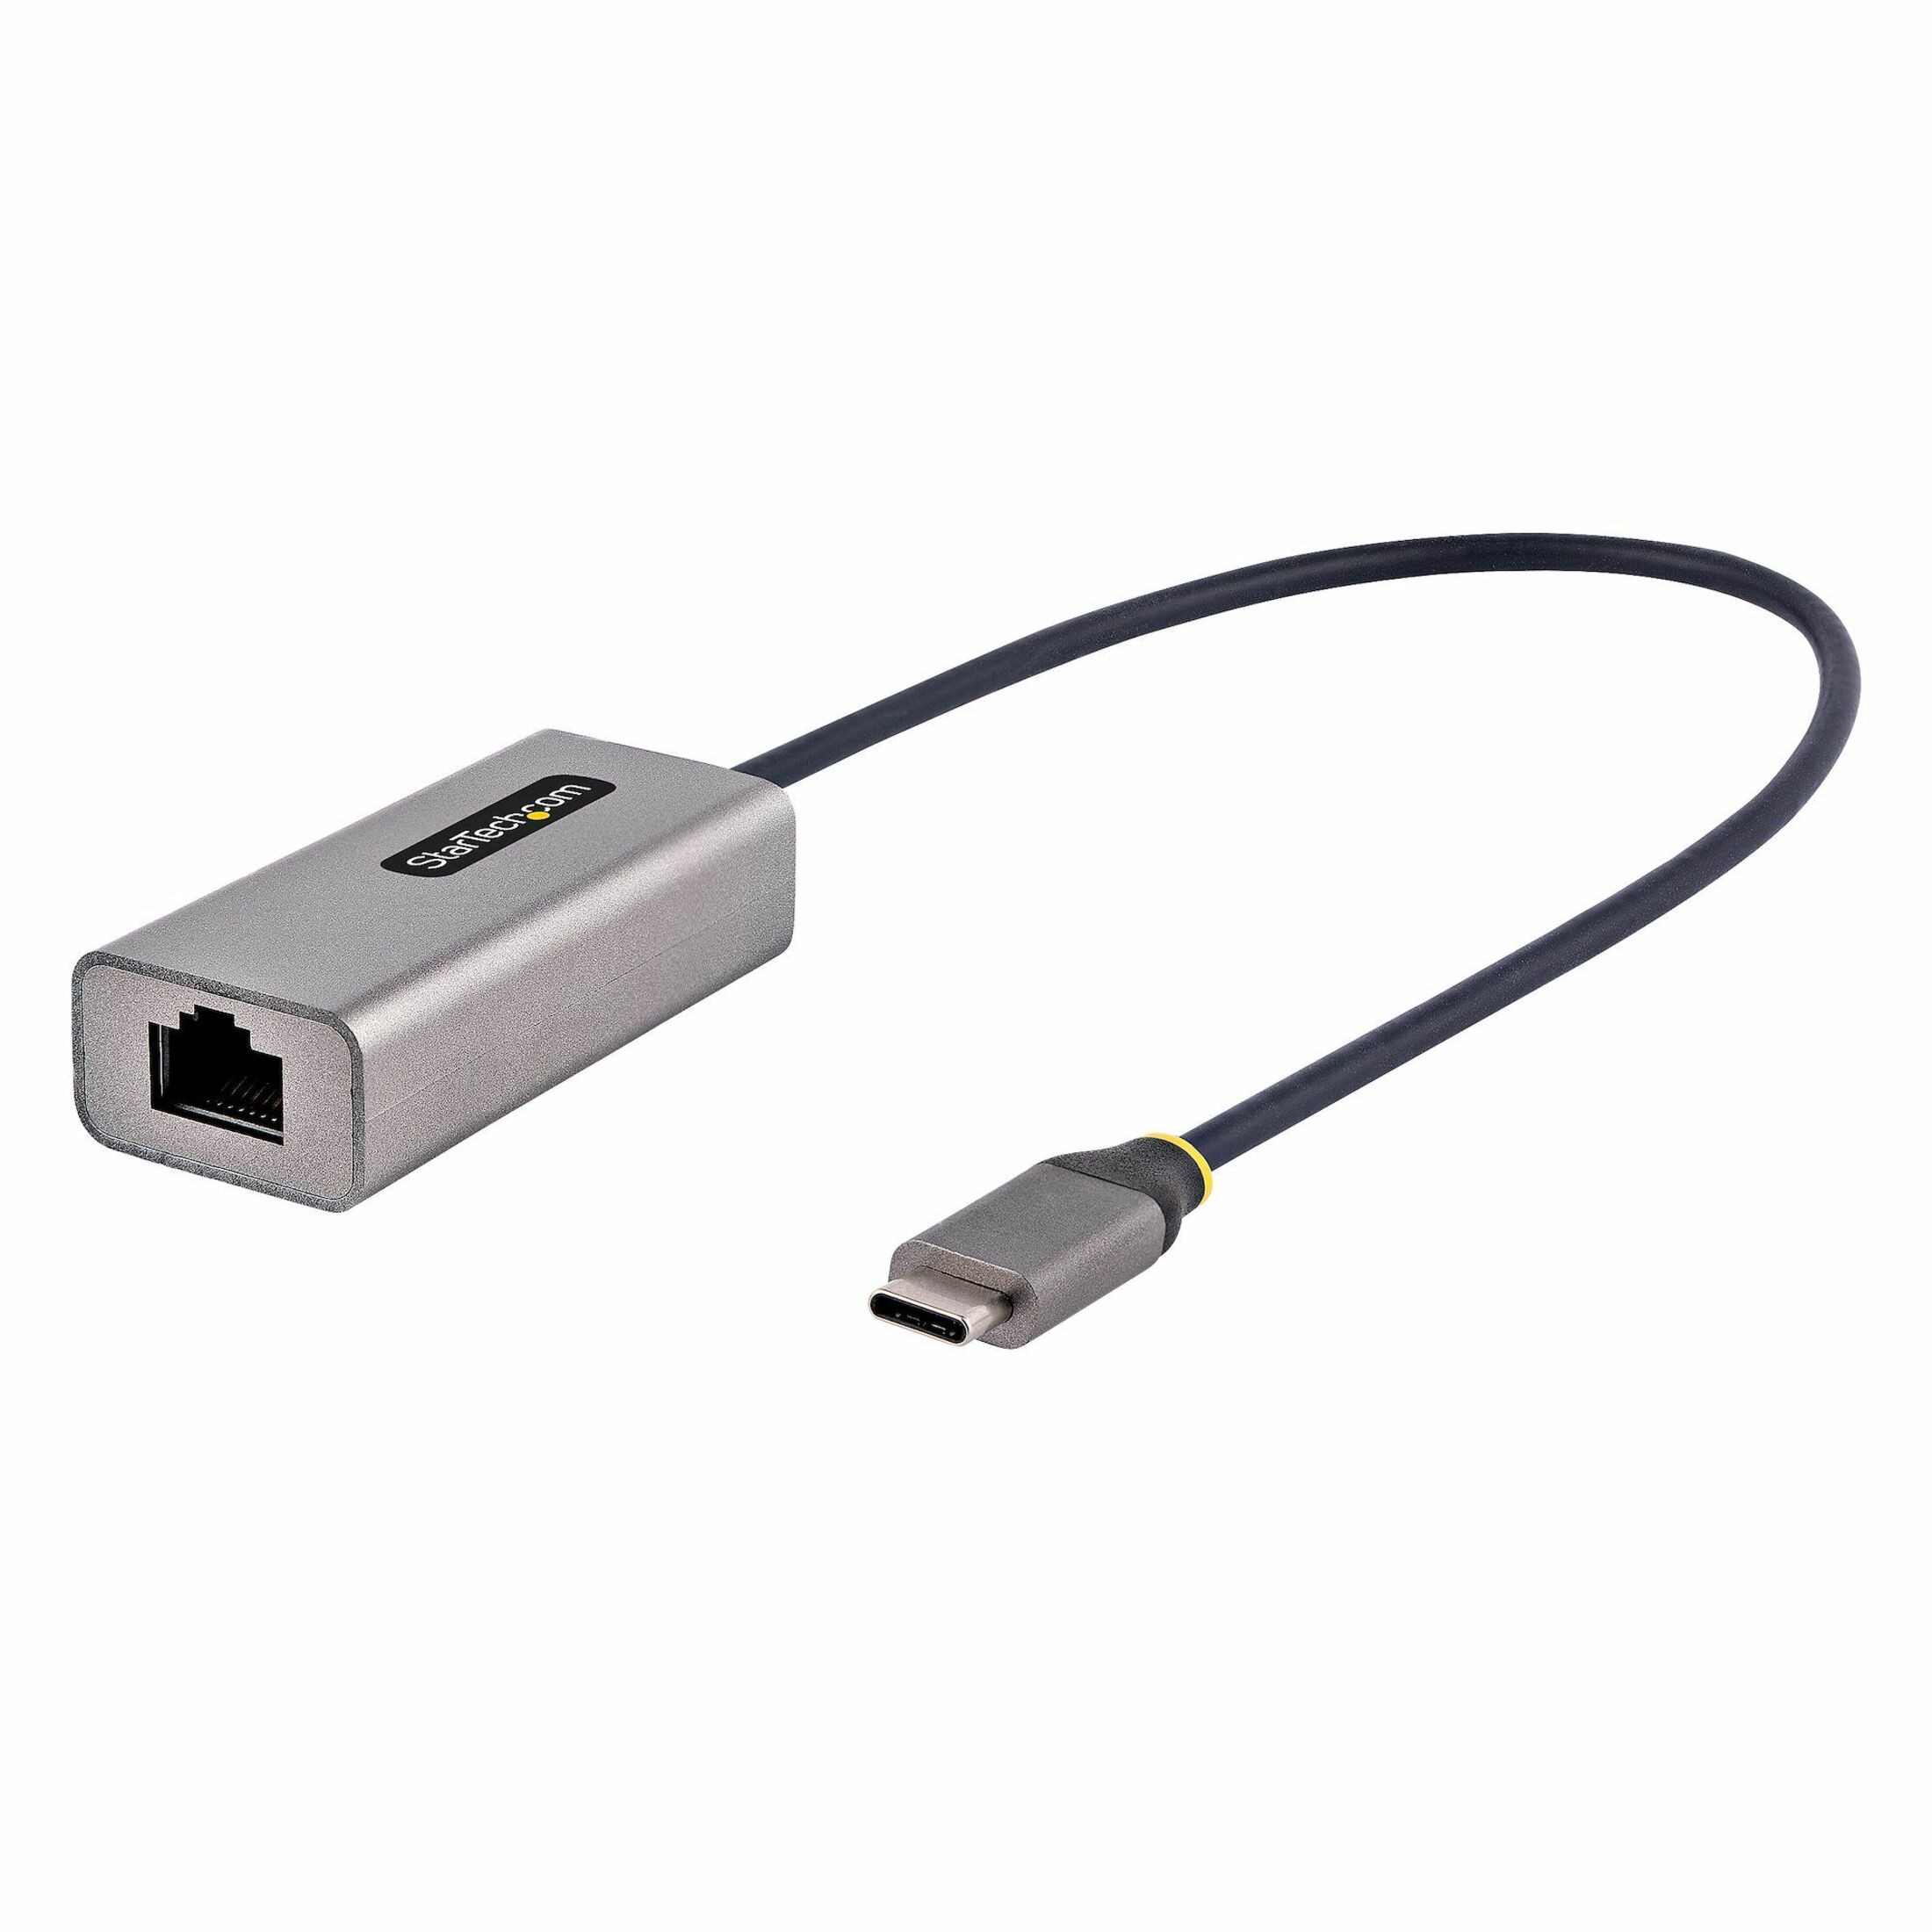 Forfærde Bungalow tiggeri Startech .com USB-C to Ethernet Adapter, 10/100/1000 Mbps, Gigabit Network  Adapter, ASIX AX88179A, 1ft/30cm Cable, Windows/macOS/LinuxThis U...  US1GC30B2 - Corporate Armor